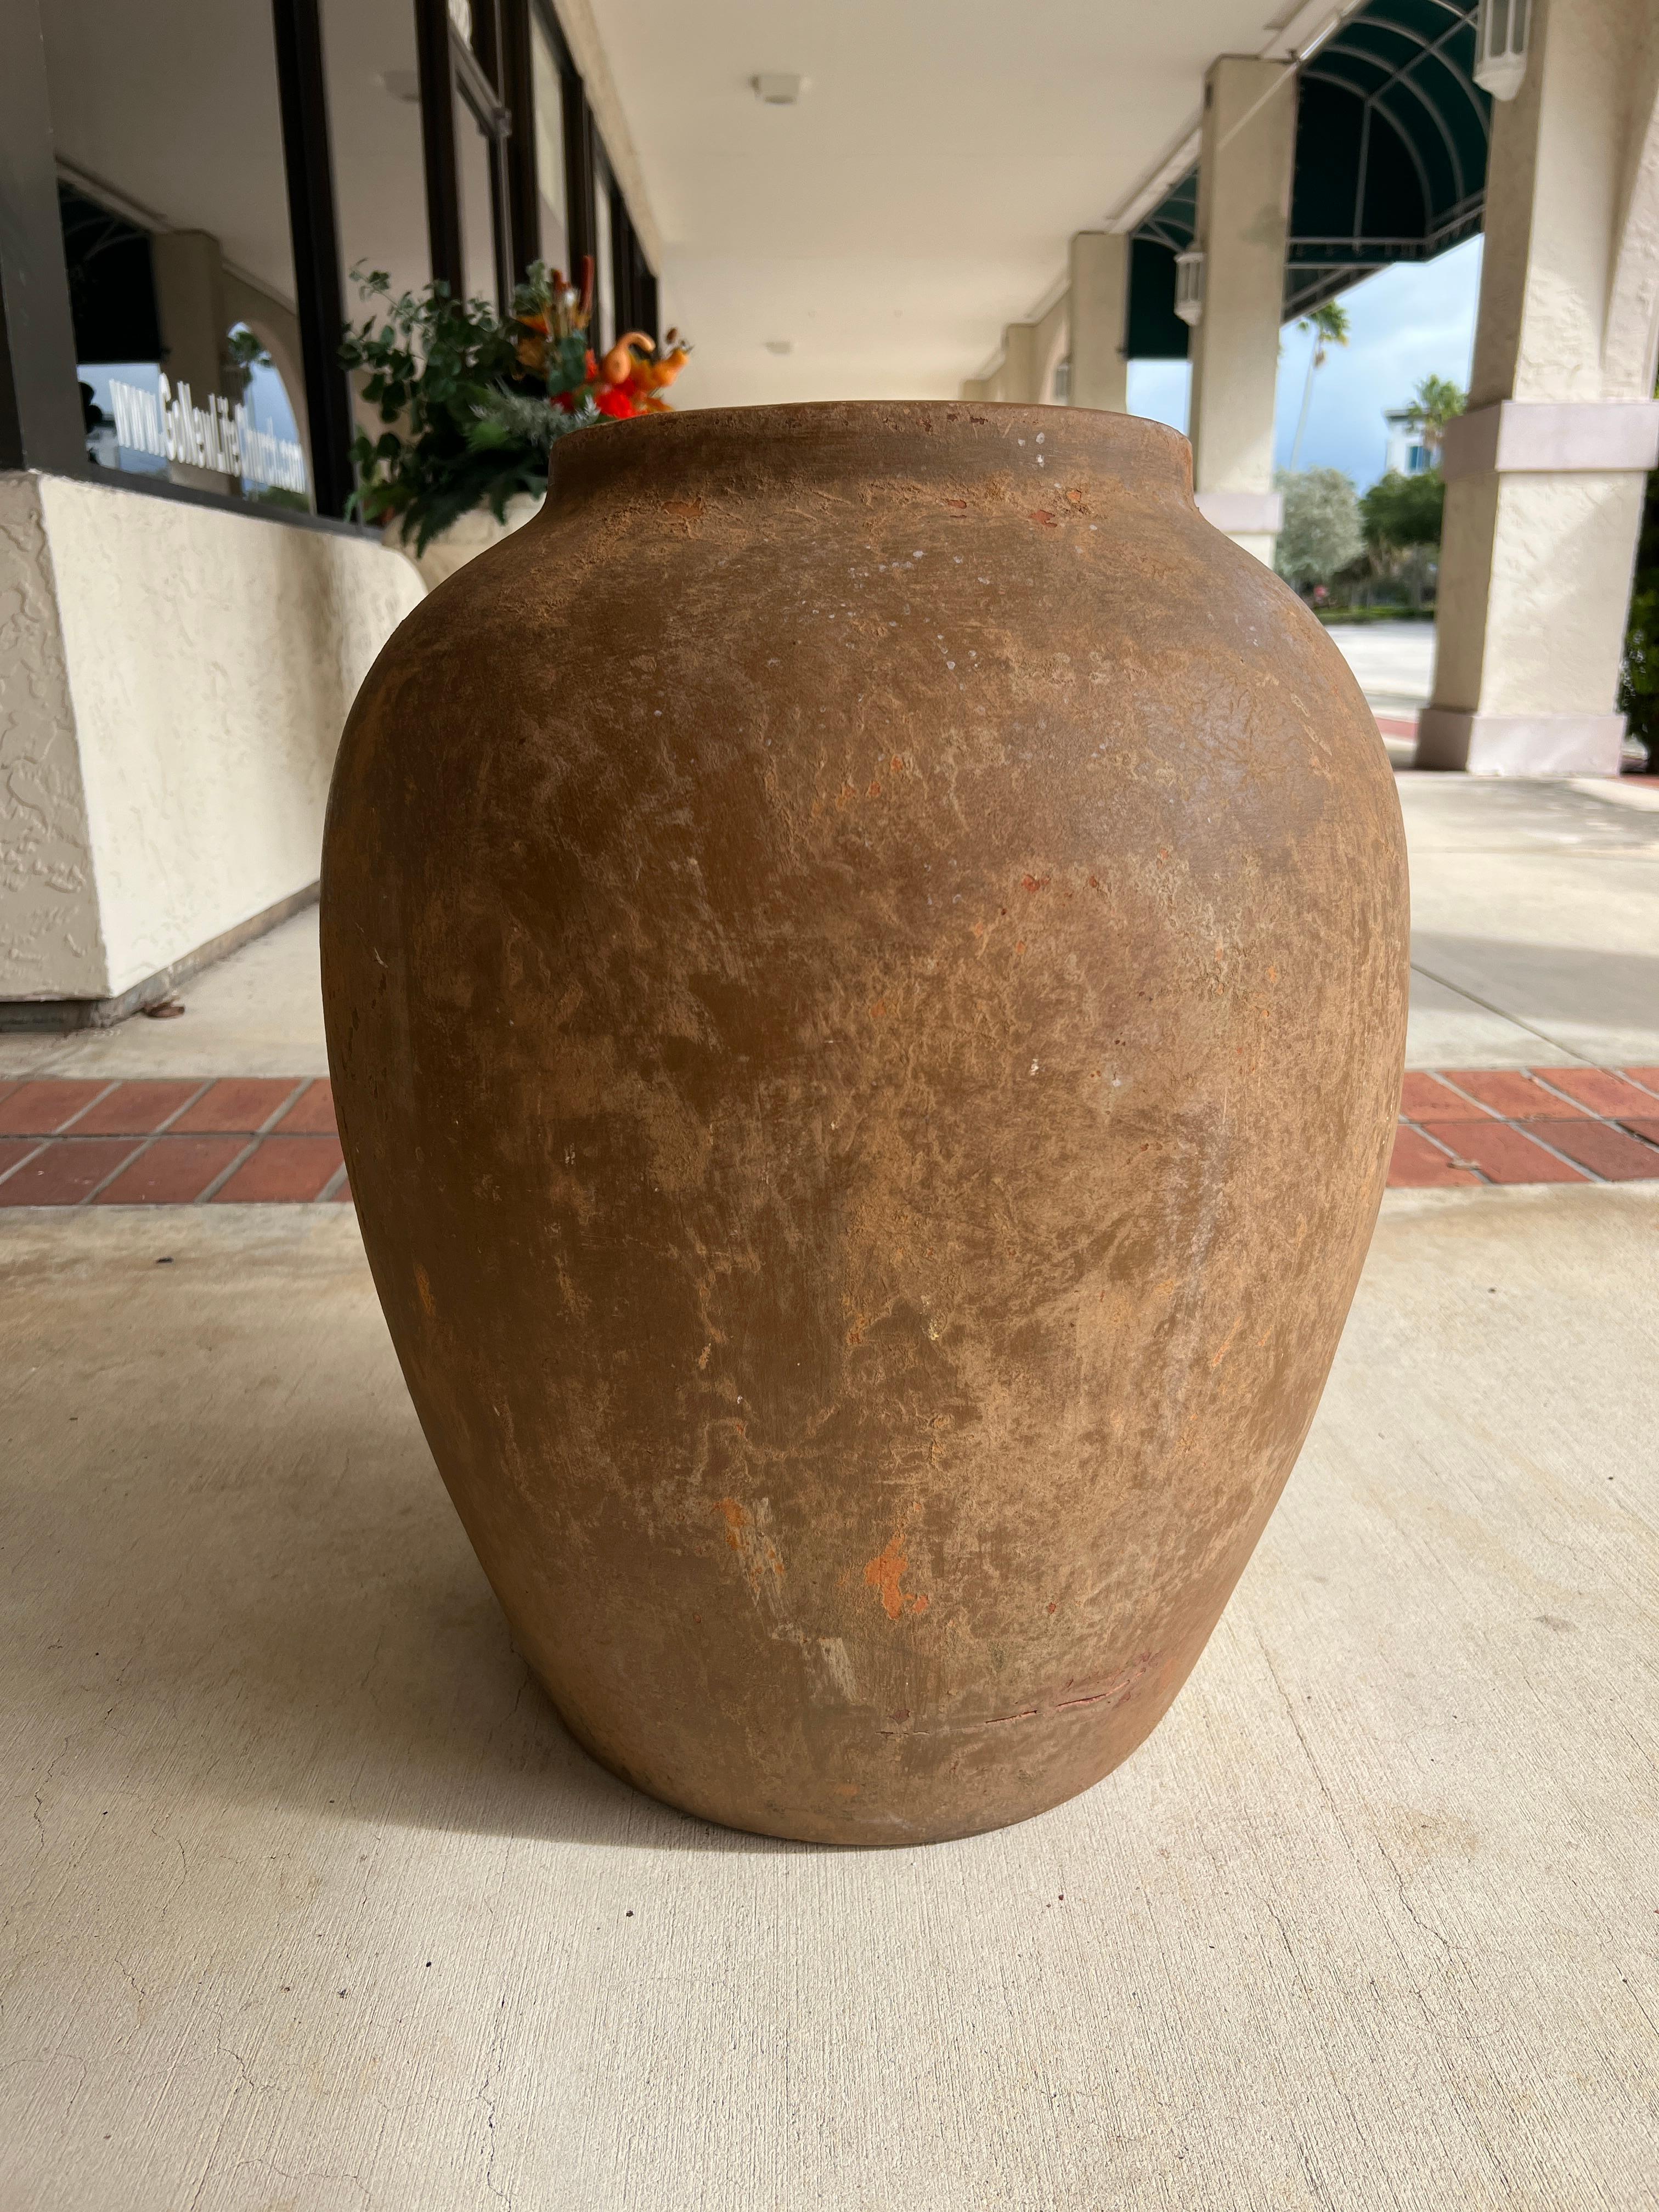 Rustic Mediterranian terracotta olive jar made in Italy. Suitable for inside or outside as a planter or decor. The jar features a drain hole in the bottom.